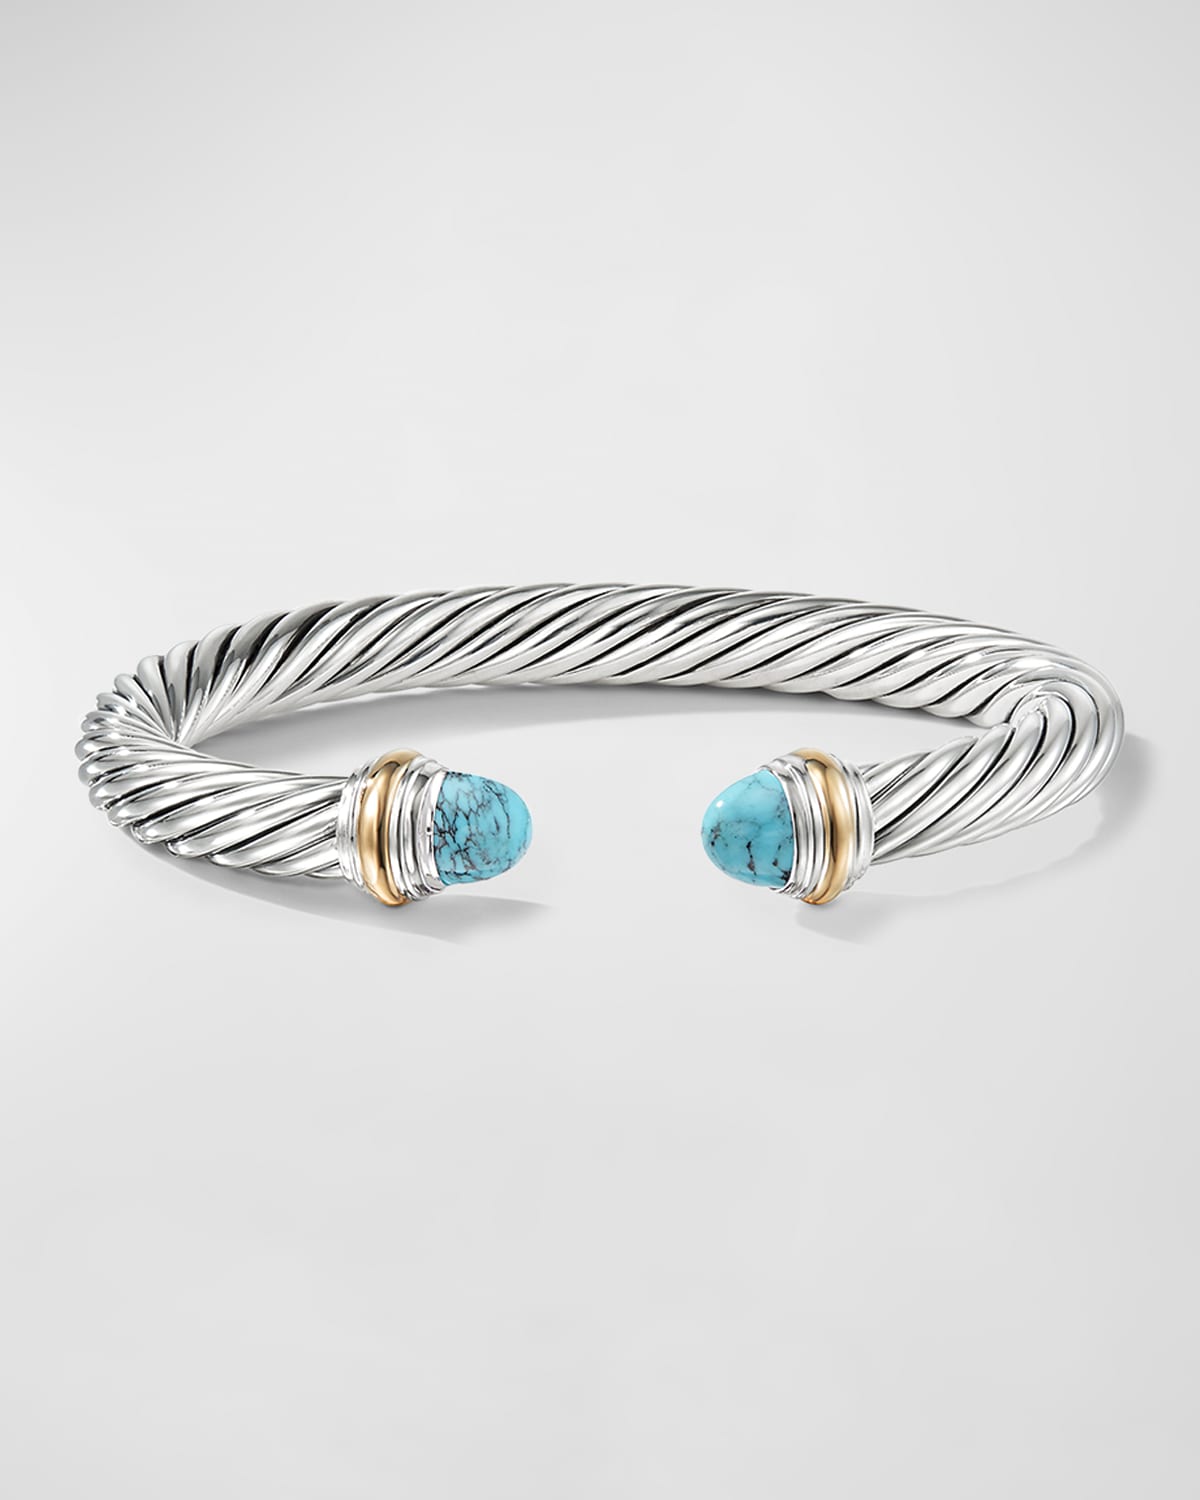 DAVID YURMAN CABLE BRACELET WITH GEMSTONE AND 14K GOLD IN SILVER, 7MM